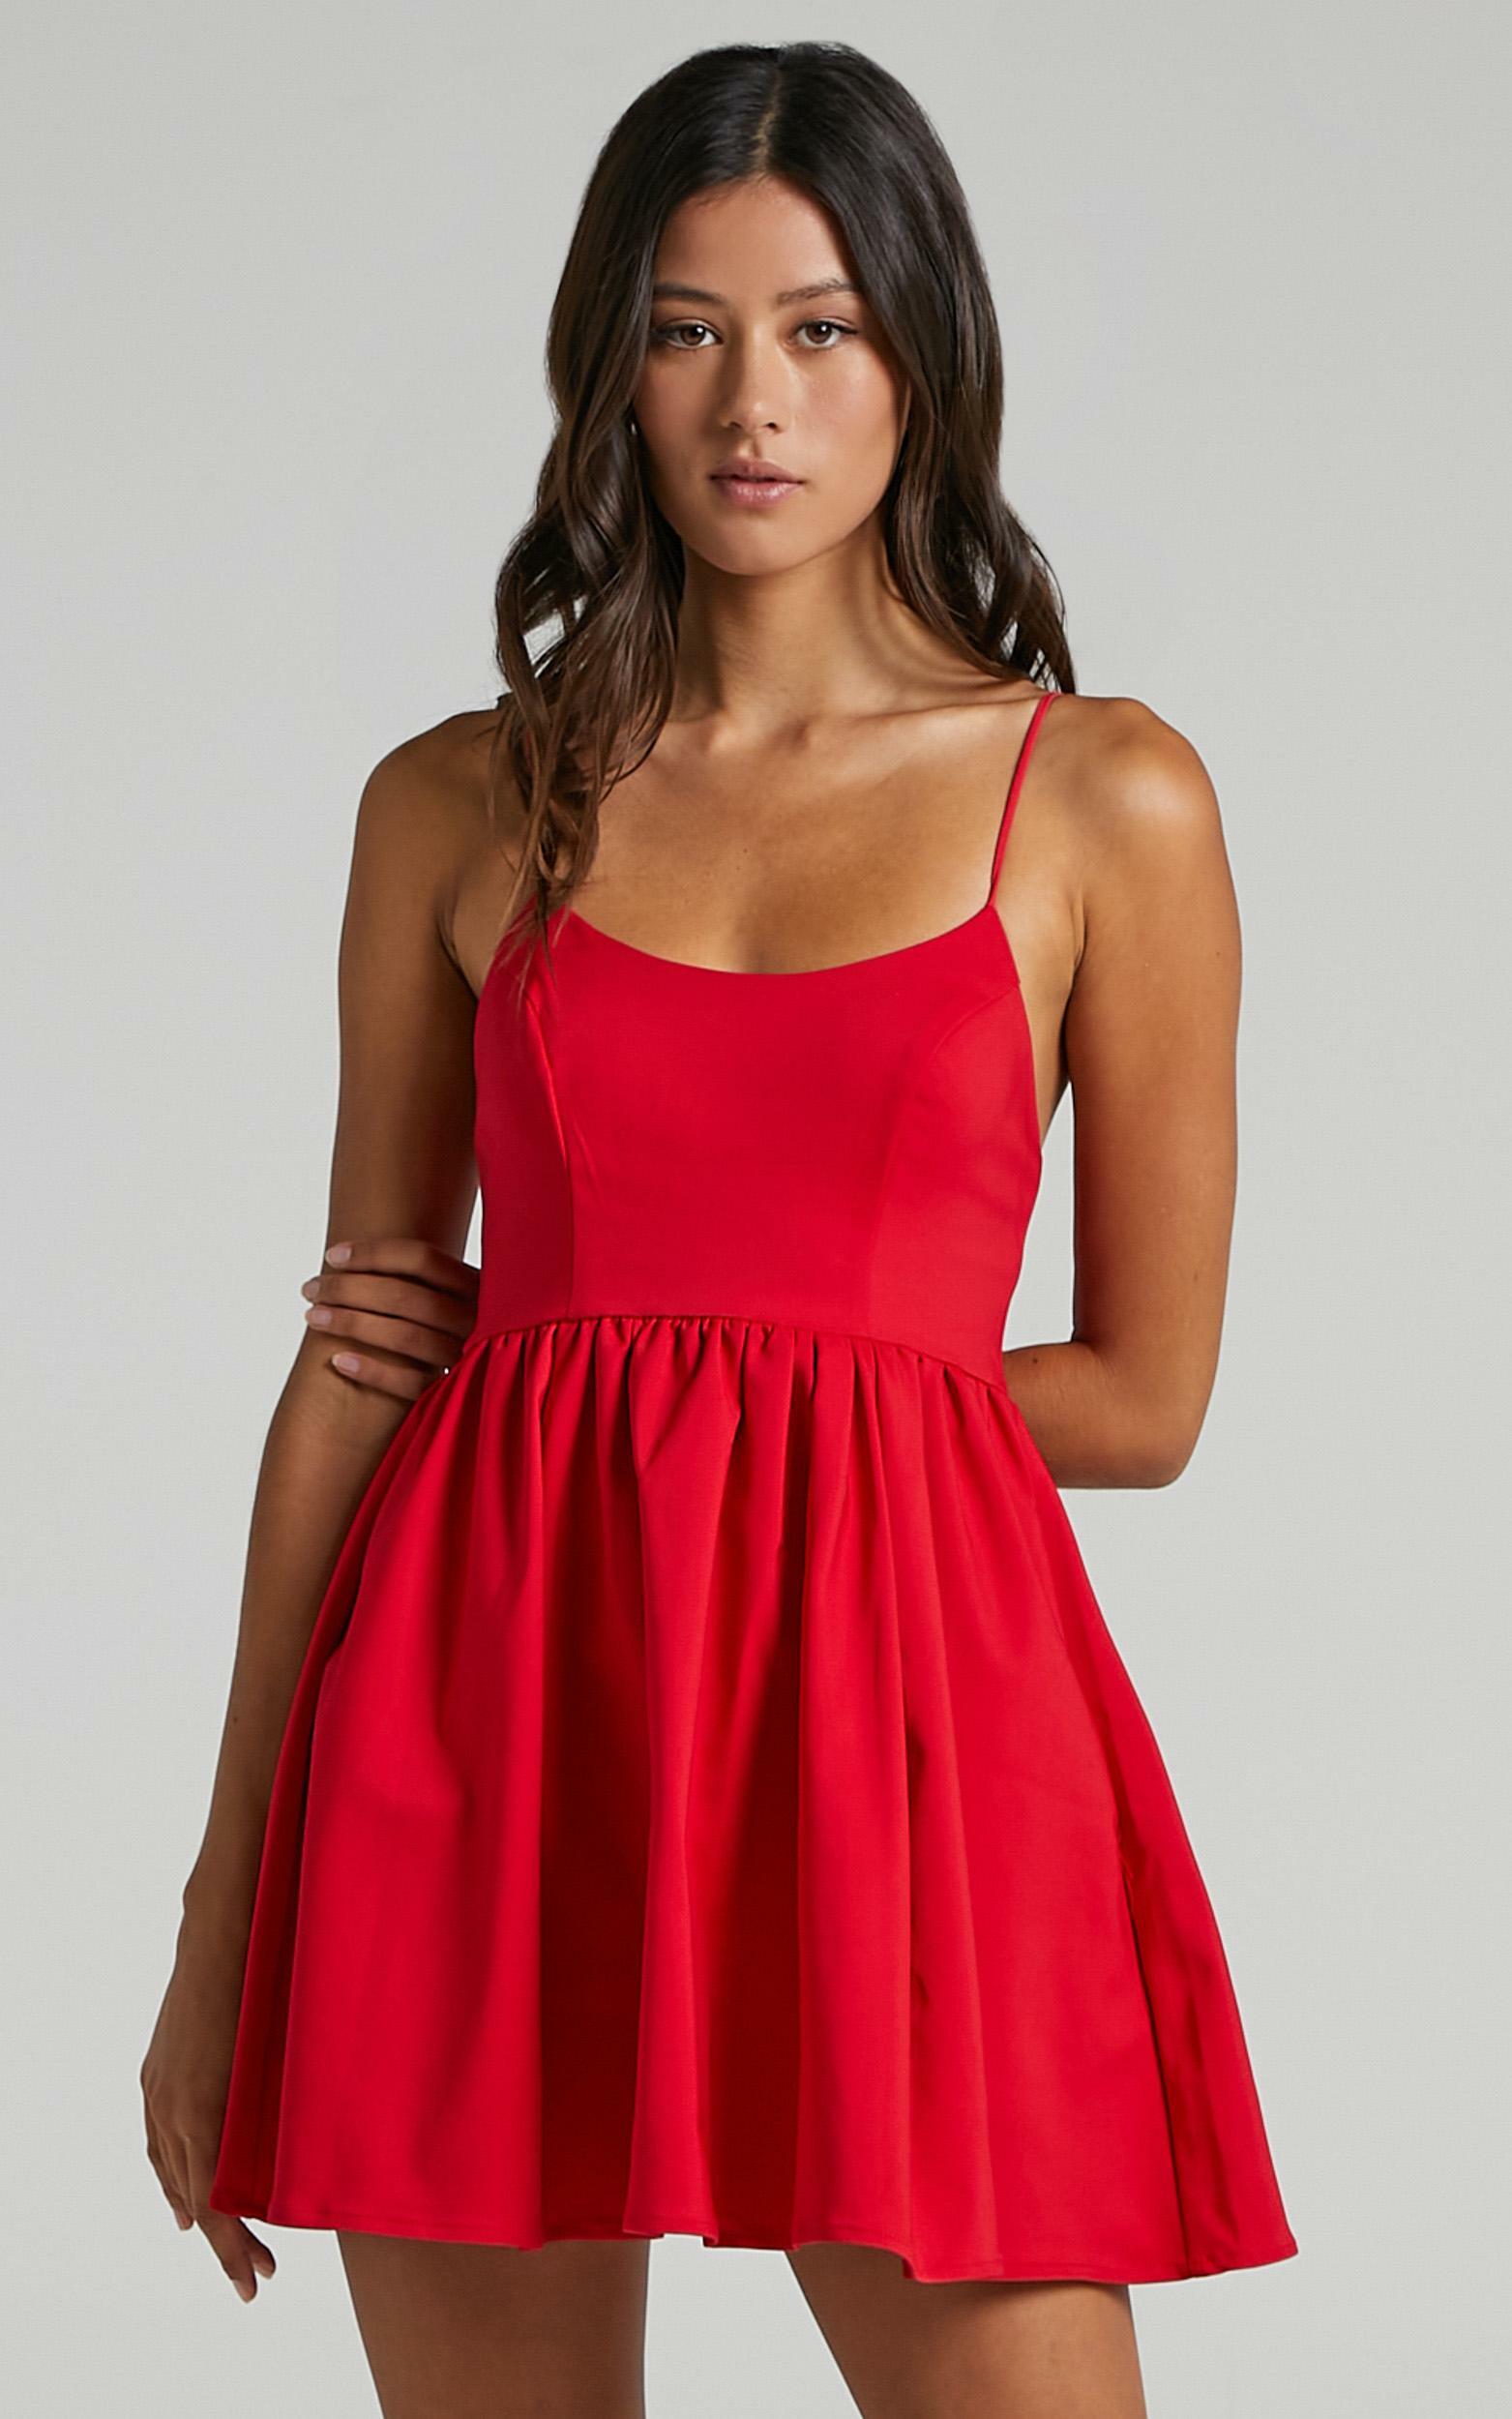 You Got Nothing To Prove A-line Mini Dress in Red - 04, RED3, hi-res image number null